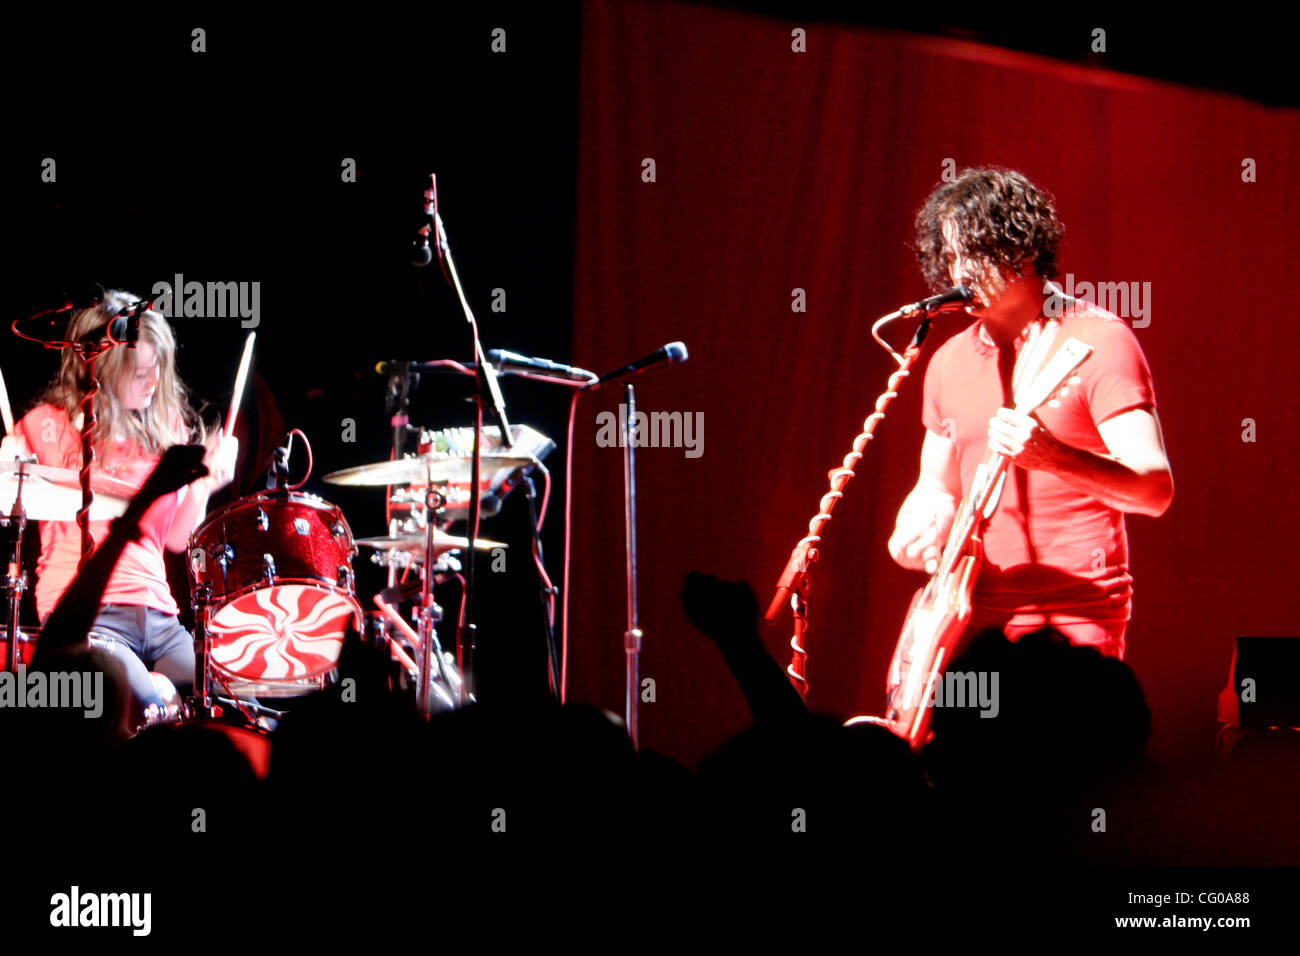 Jack White and Meg White - The White Stripes, performing at The Filmore East at Irving Plaza on June 19, 2007 Stock Photo